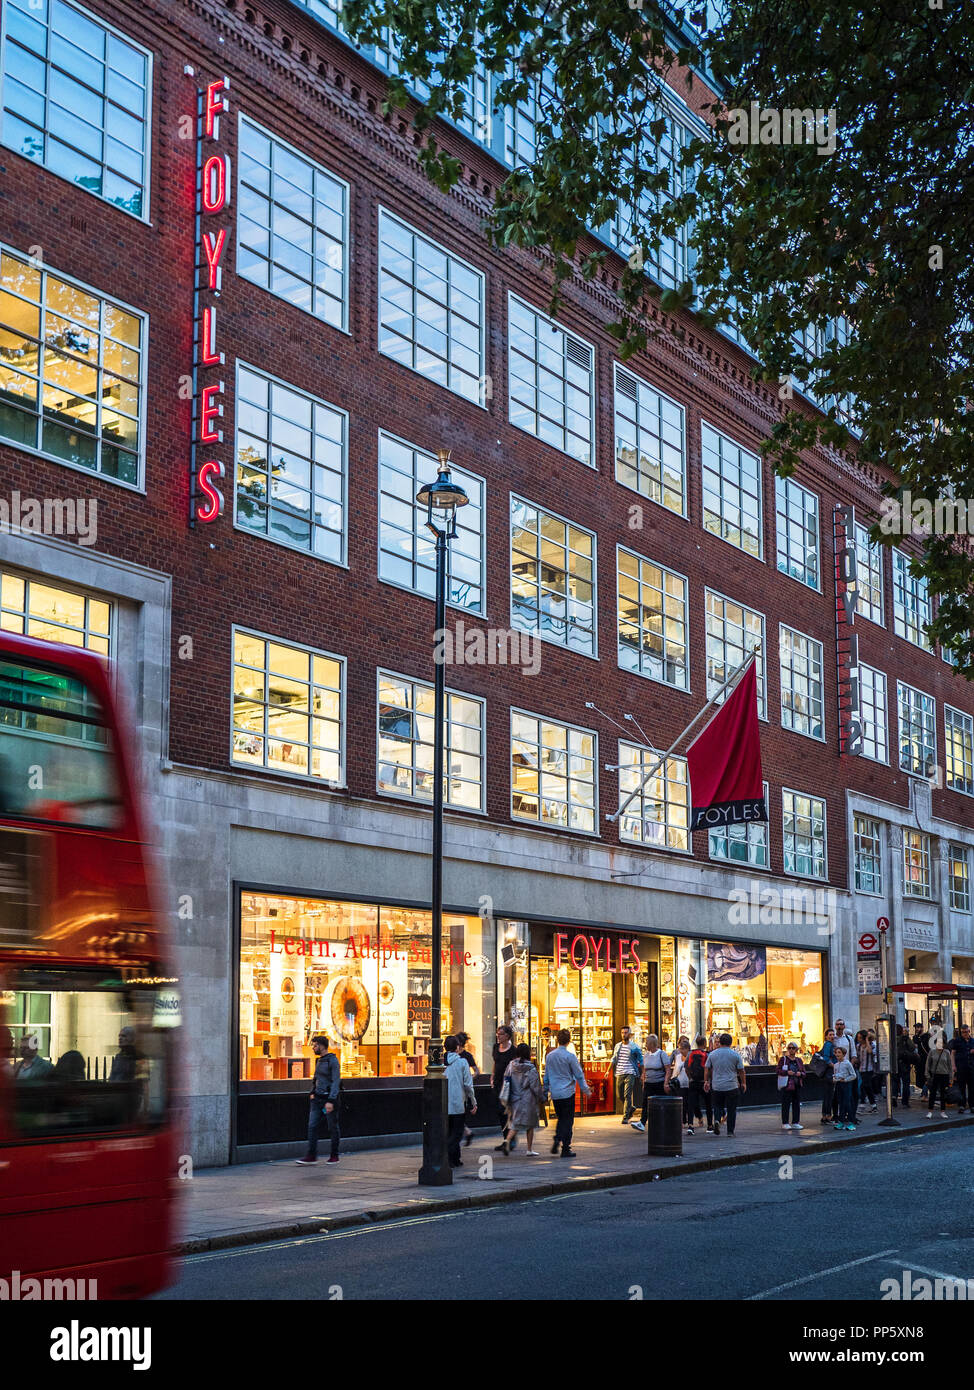 Foyles bookshop bookstore in Charing Cross Road in central London UK. Foyles was founded in 1903. Stock Photo